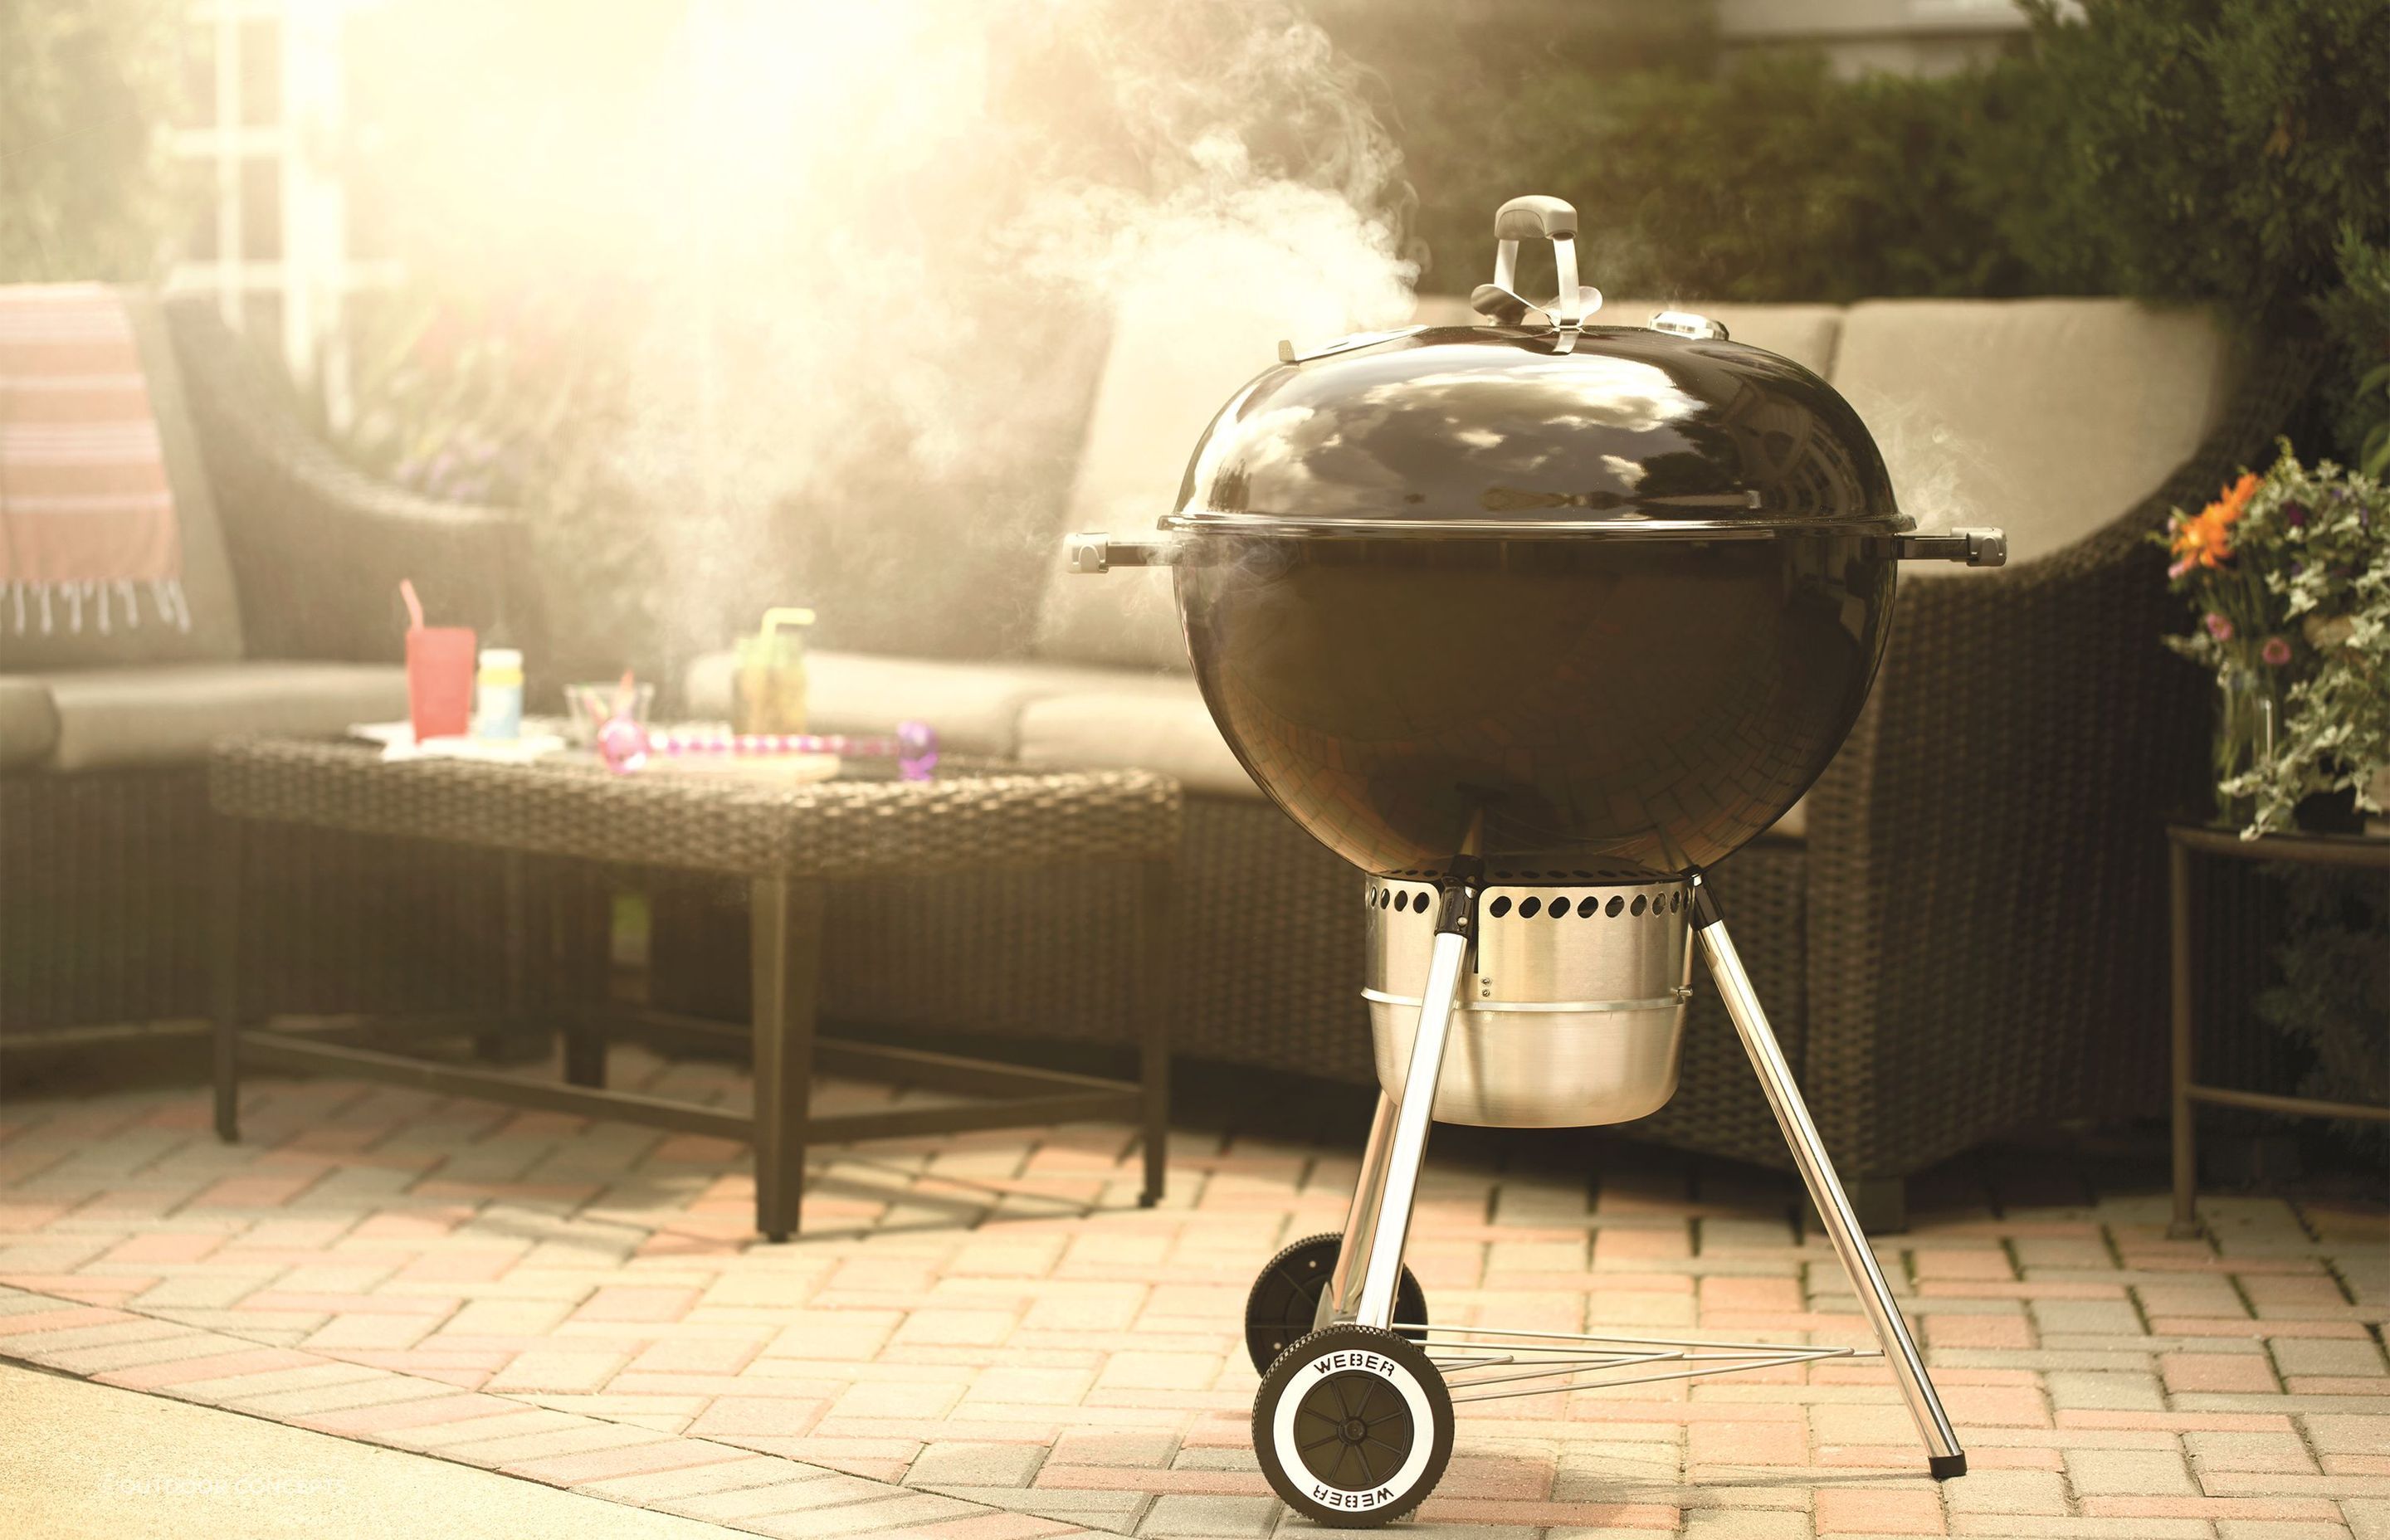 The rich smoky flavour from a charcoal grill like the Webber Premium Kettle Charcoal BBQ is hard to beat.